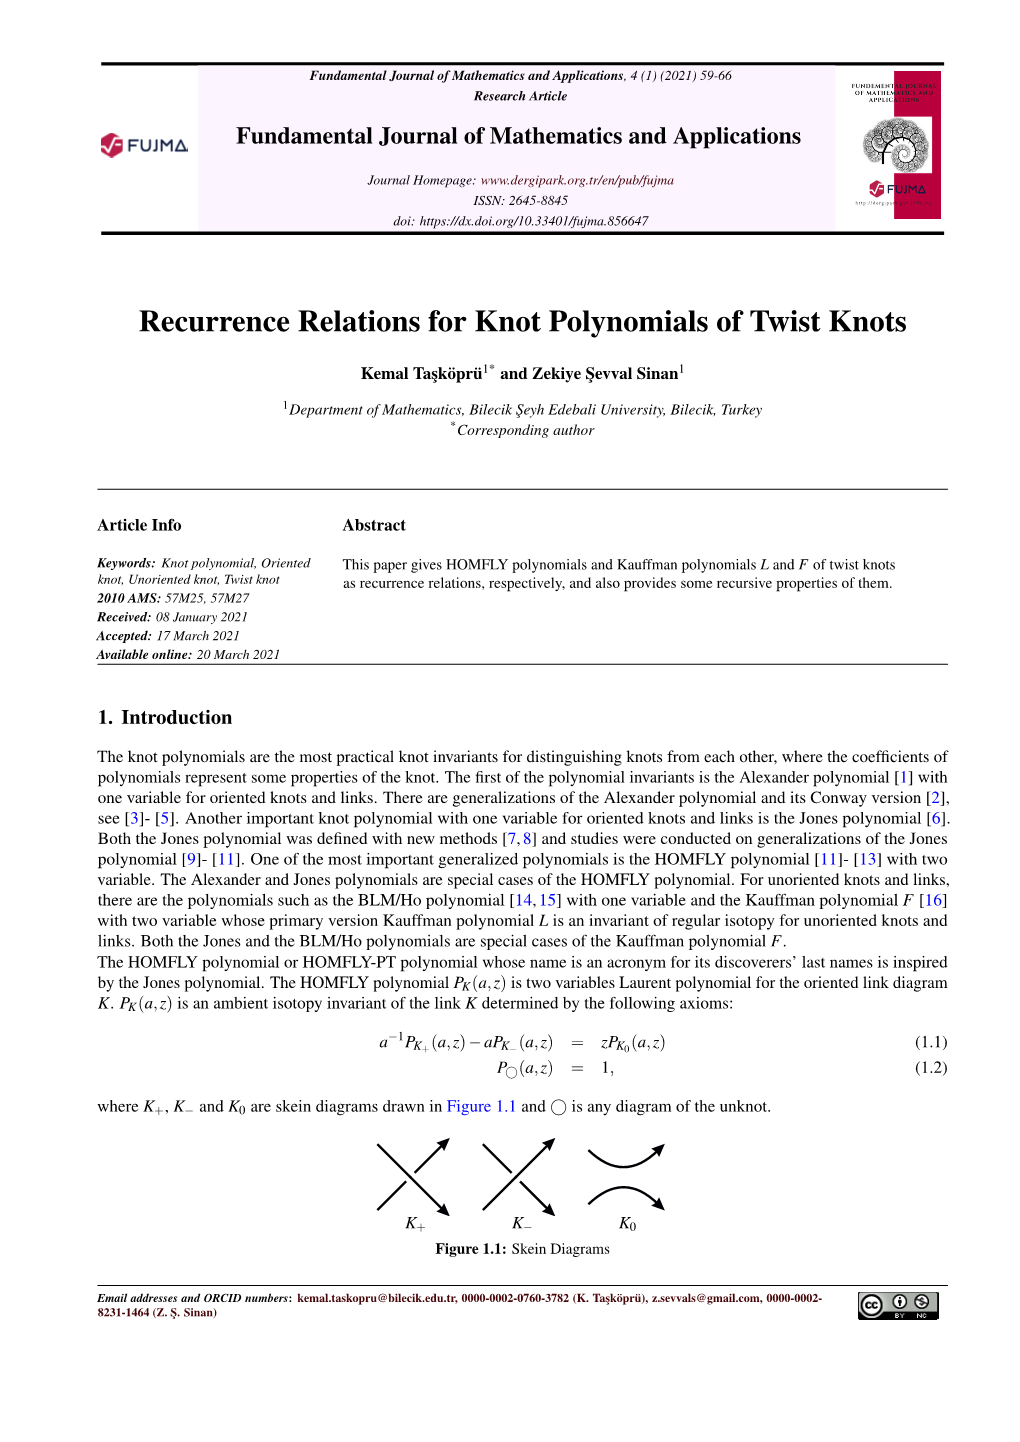 Recurrence Relations for Knot Polynomials of Twist Knots